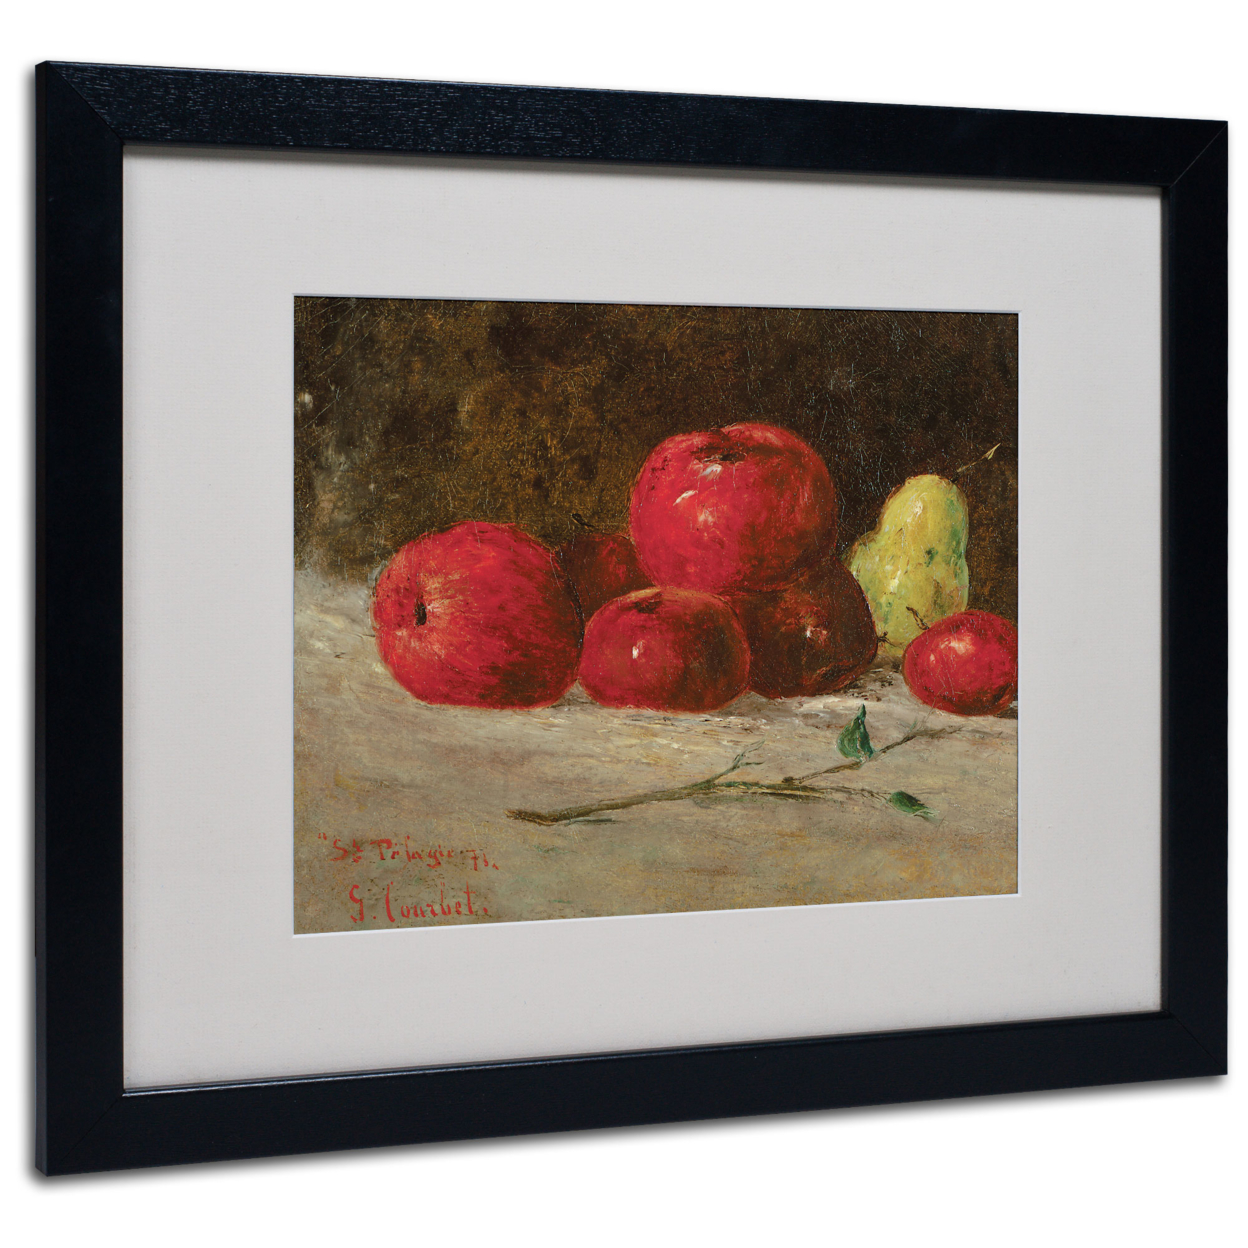 Gustave Courbet 'Apples And Pears' Black Wooden Framed Art 18 X 22 Inches